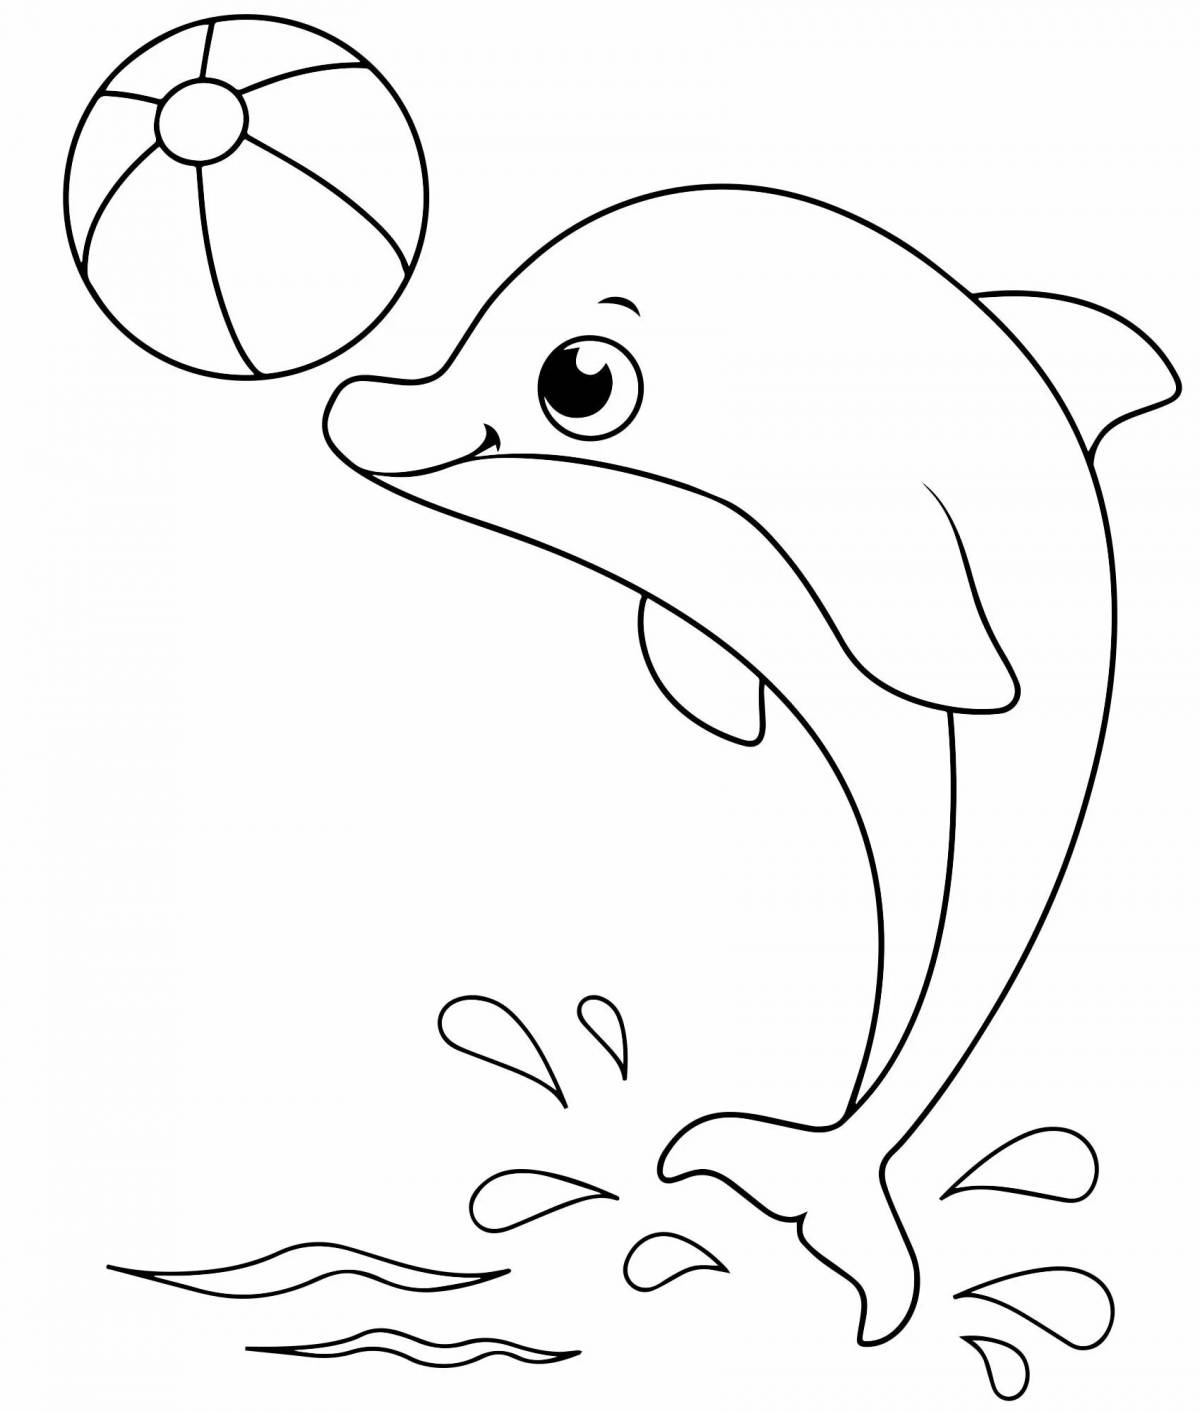 Dolphin for kids #9